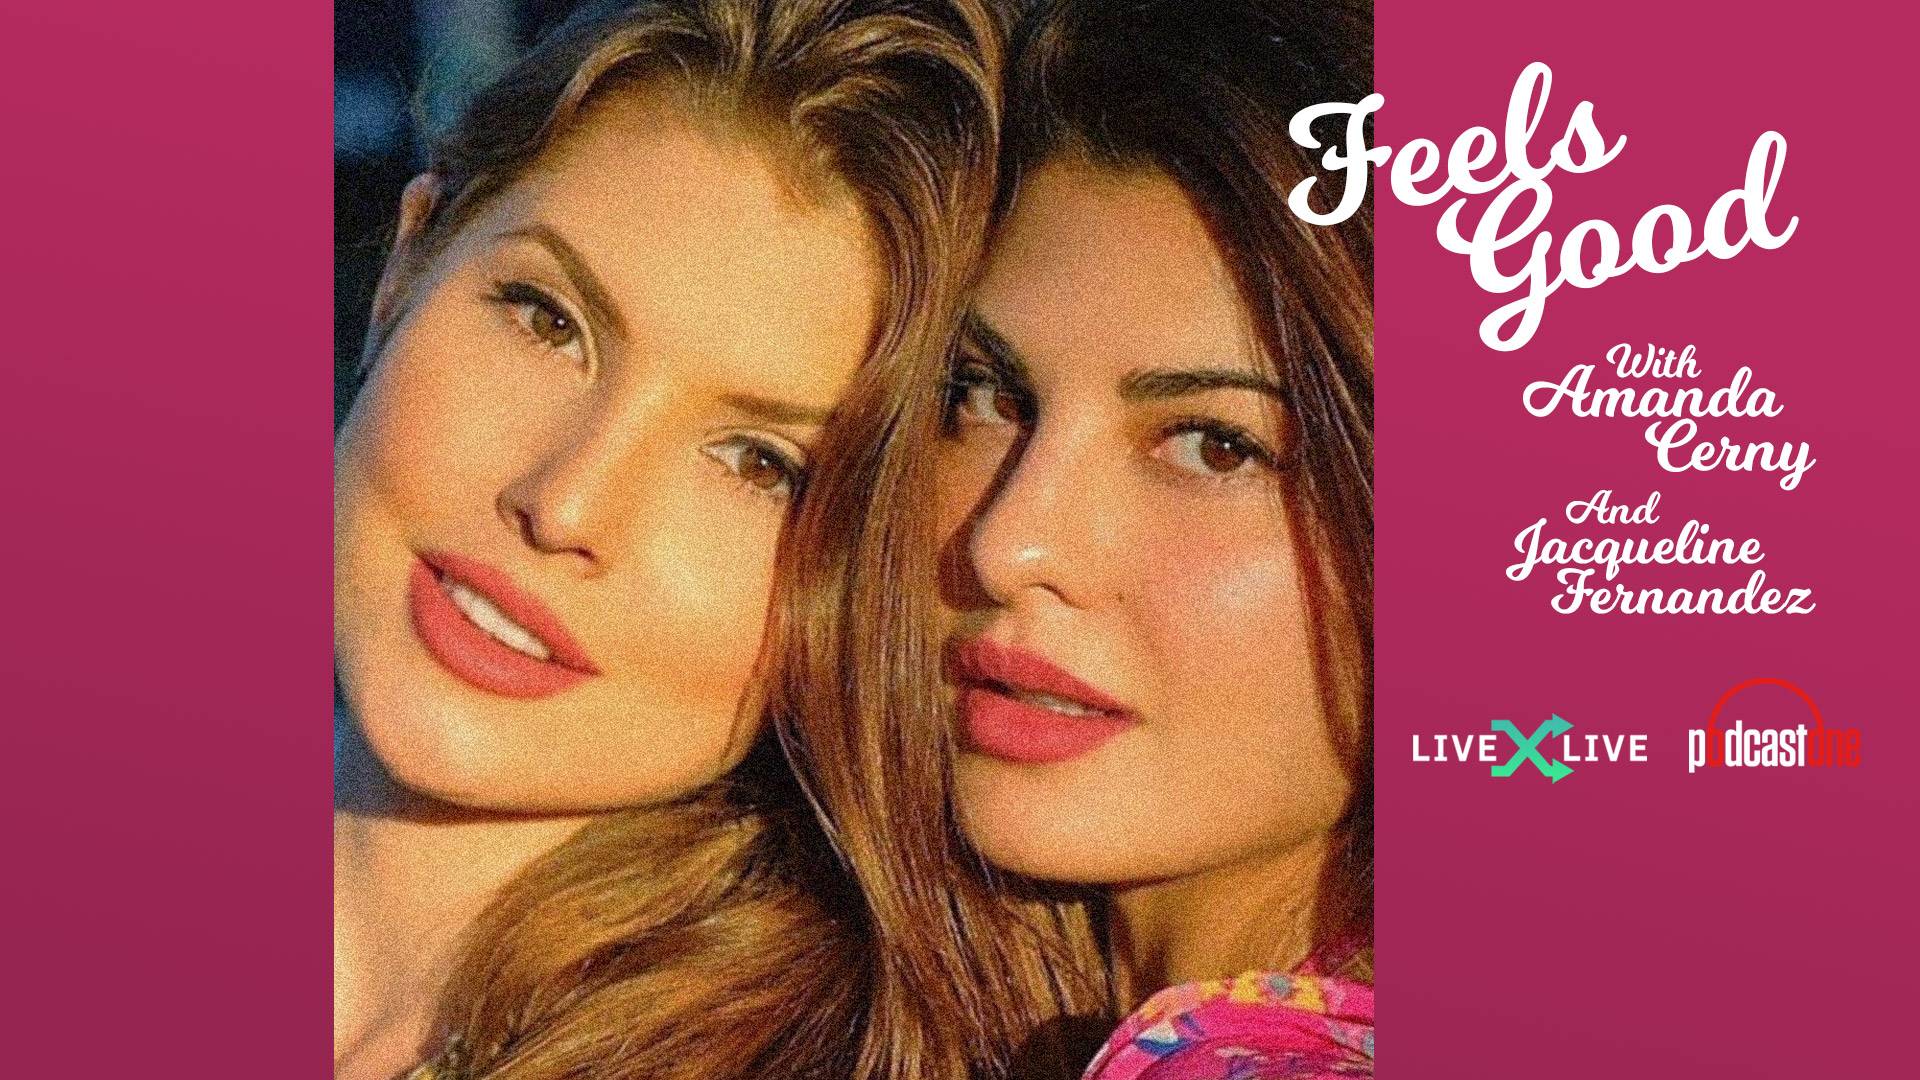 Jacqueline Xvideo - Watch Feels Good with Amanda Cerny and Jacqueline Fernandez Videos -  LiveOne - Premium Live Music